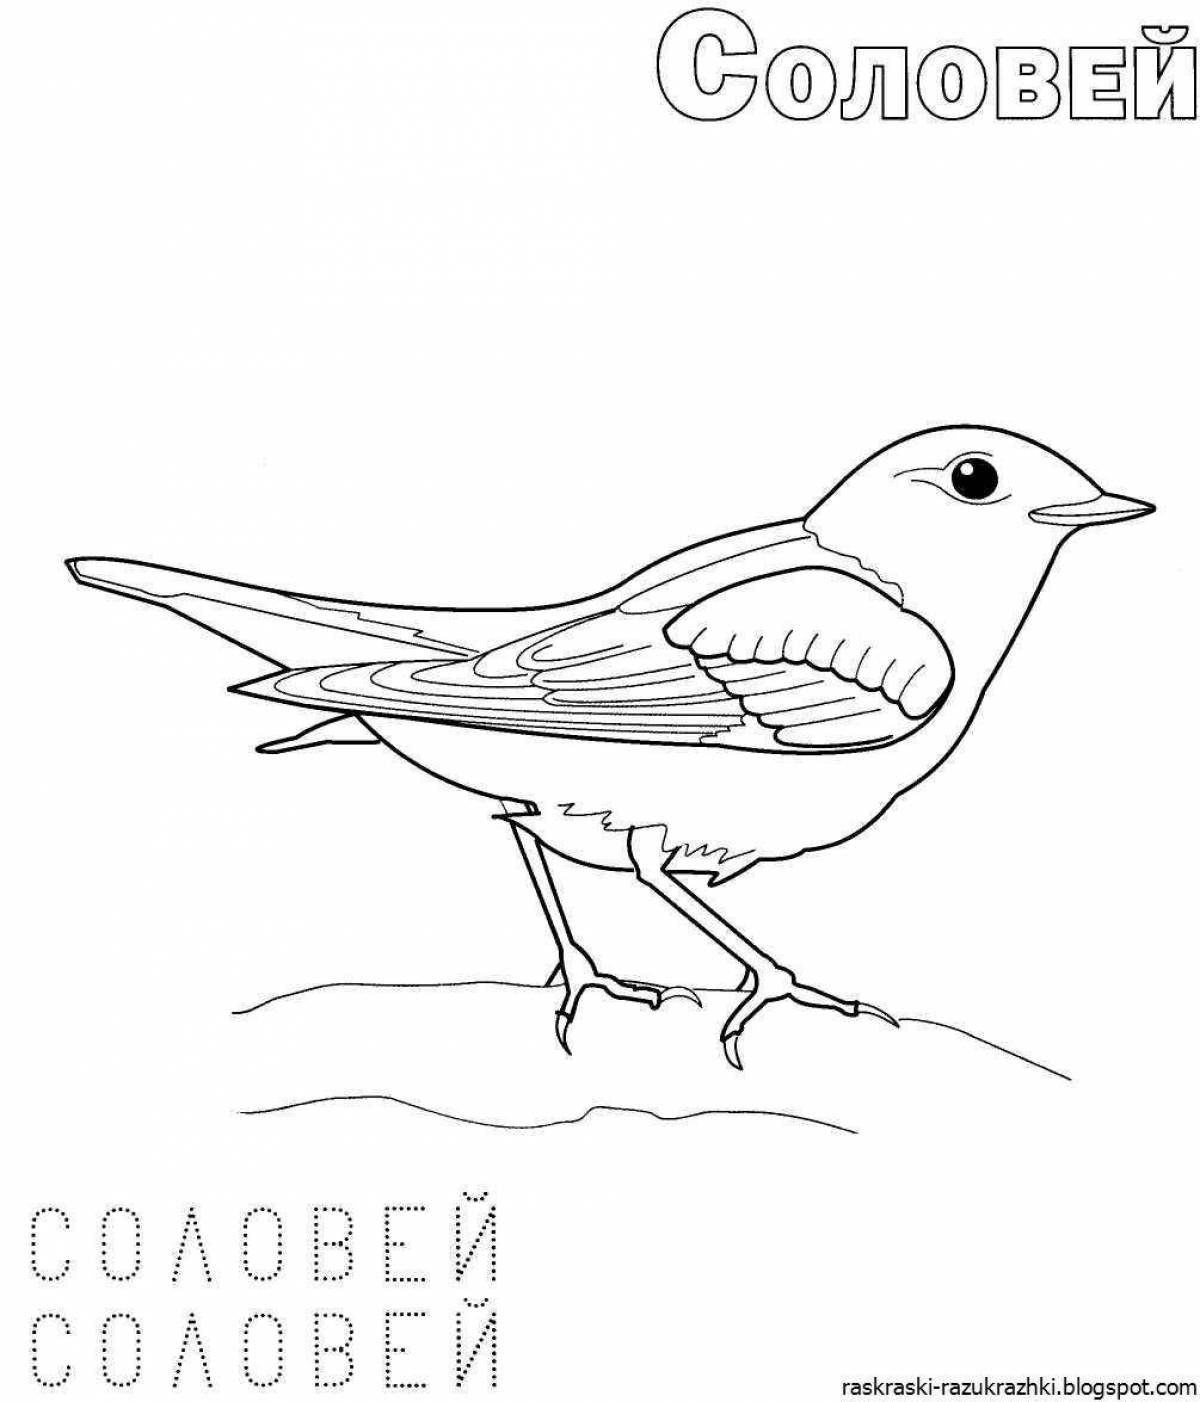 Majestic migratory bird coloring page